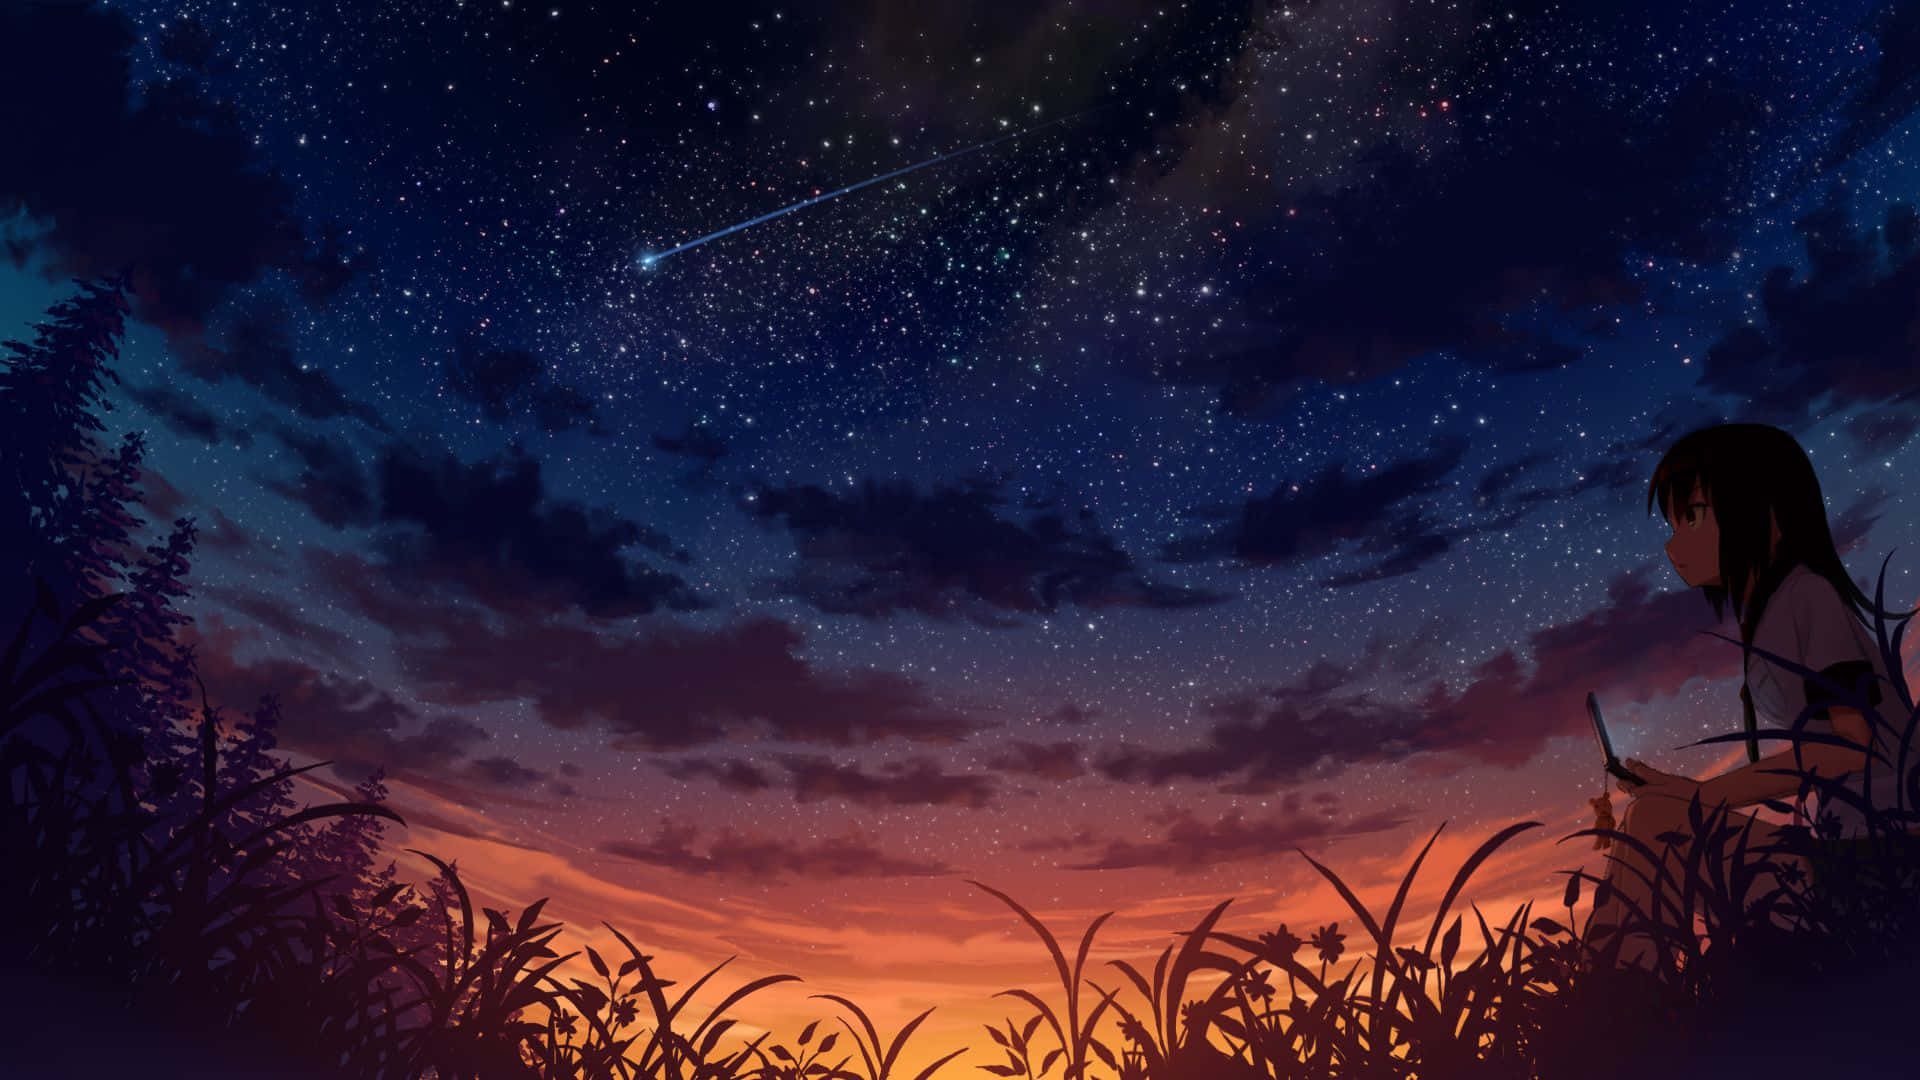 Gazing at the beauty of the starry sky.